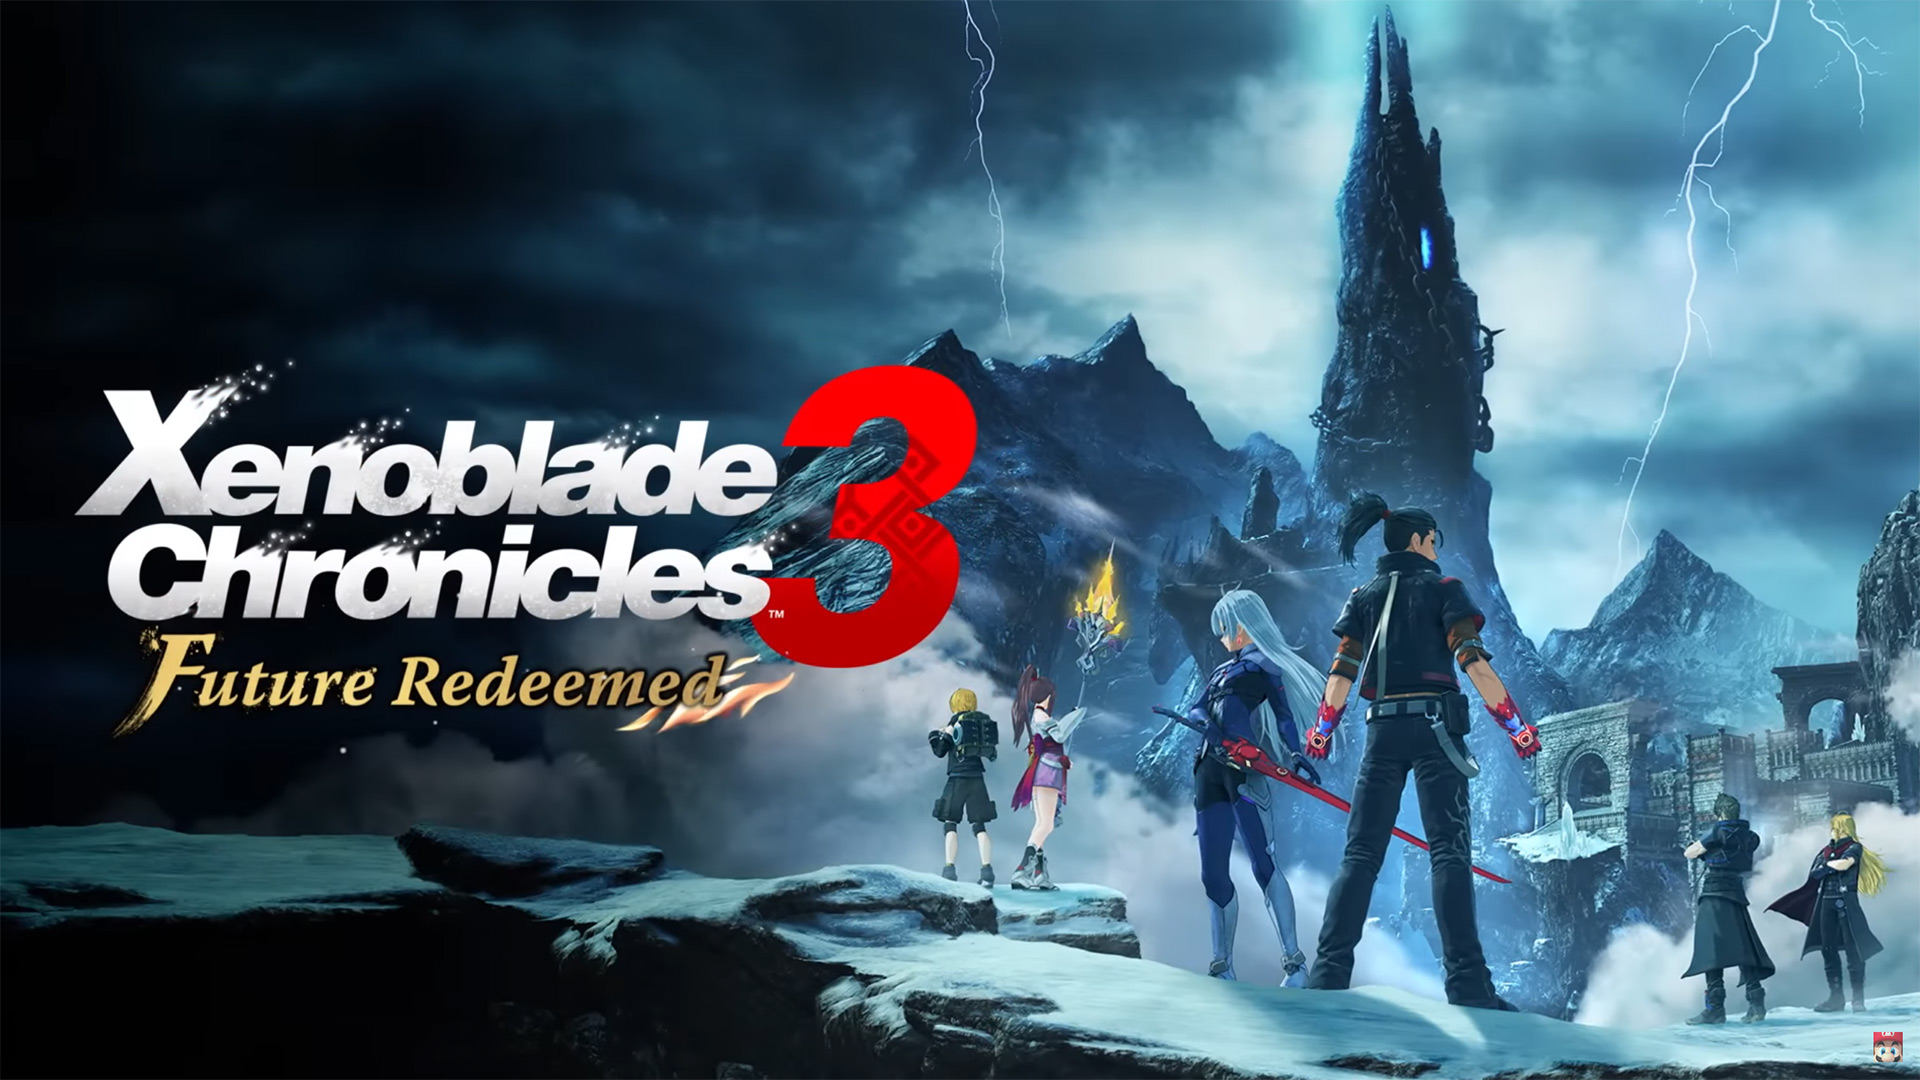 Xenoblade Chronicles 3 Future Redeemed arrives April 25